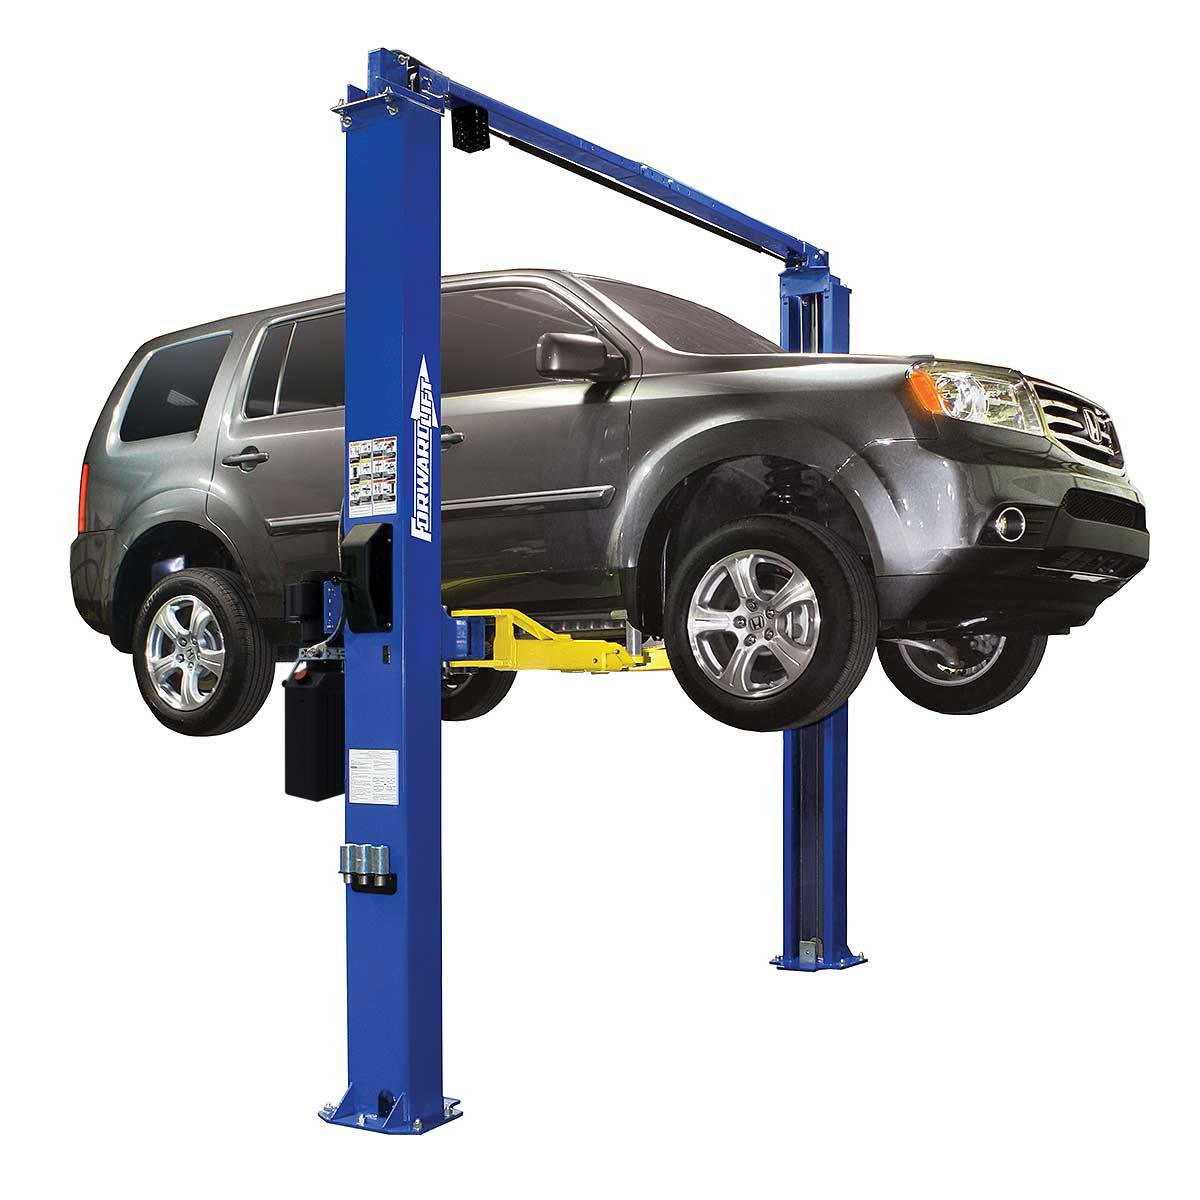 What factors must I consider before installing a 2-post lift?